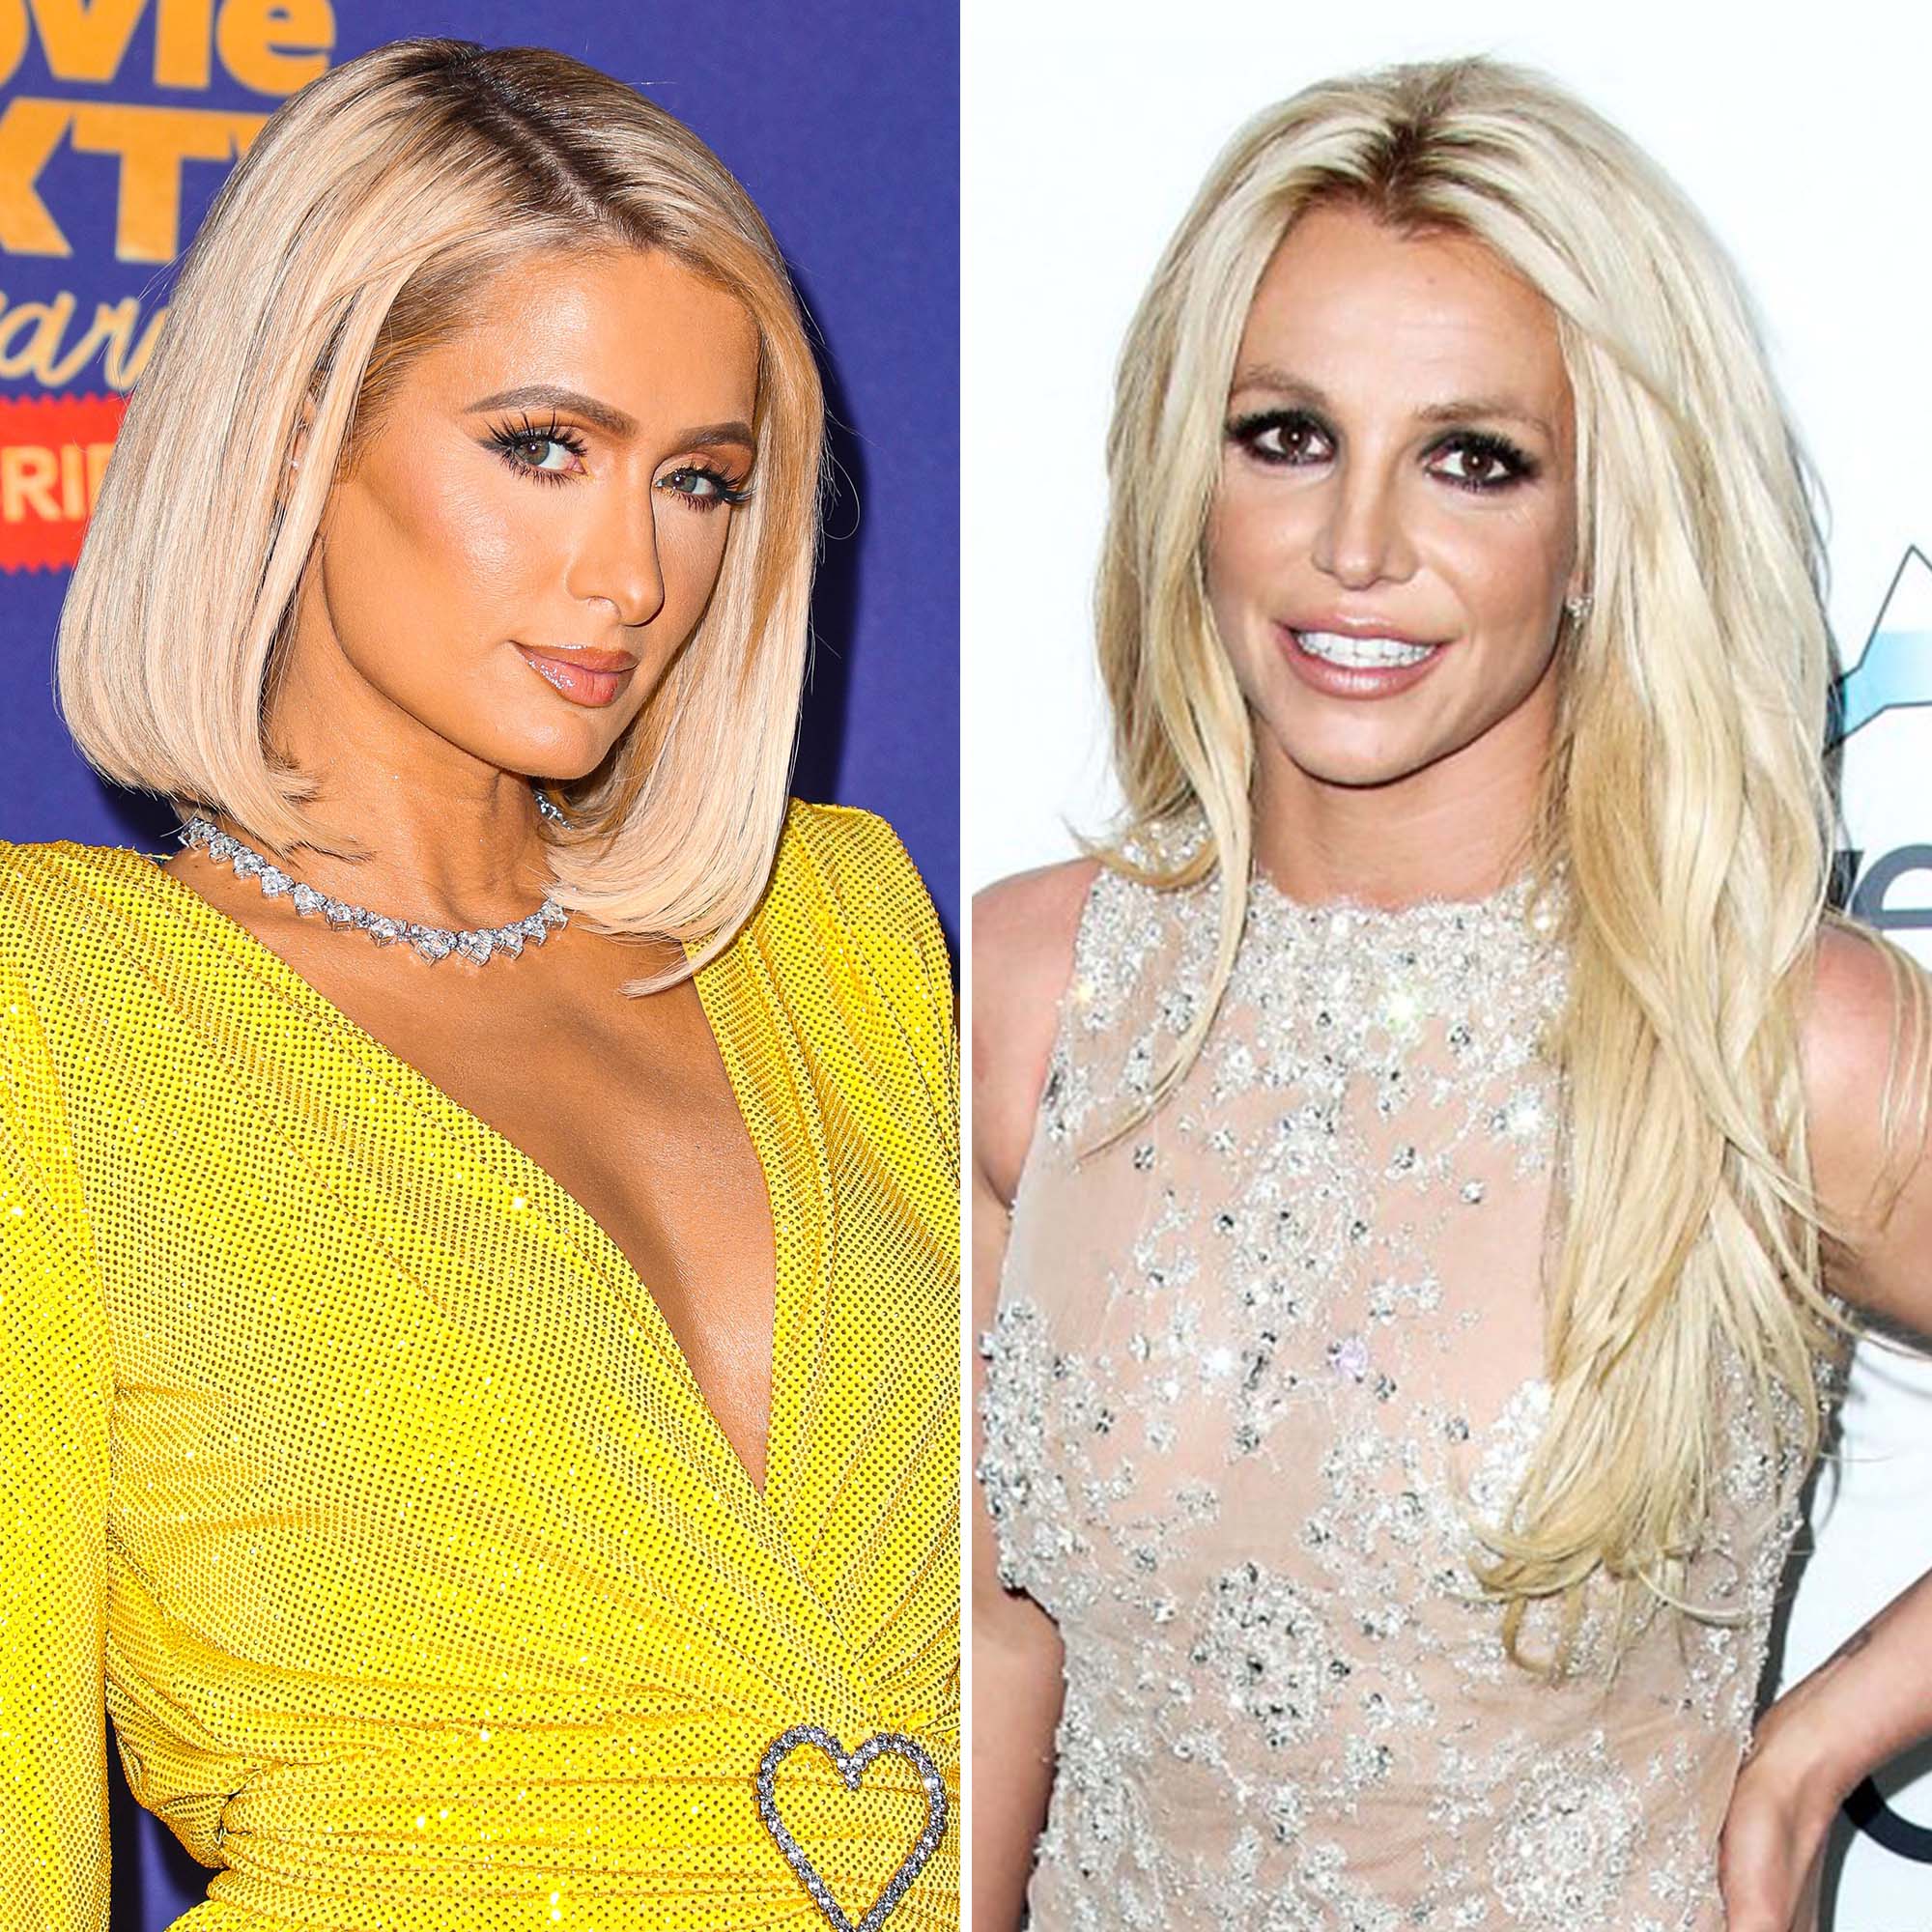 Paris Hilton Responds to Britney Spears' Hearing Comments